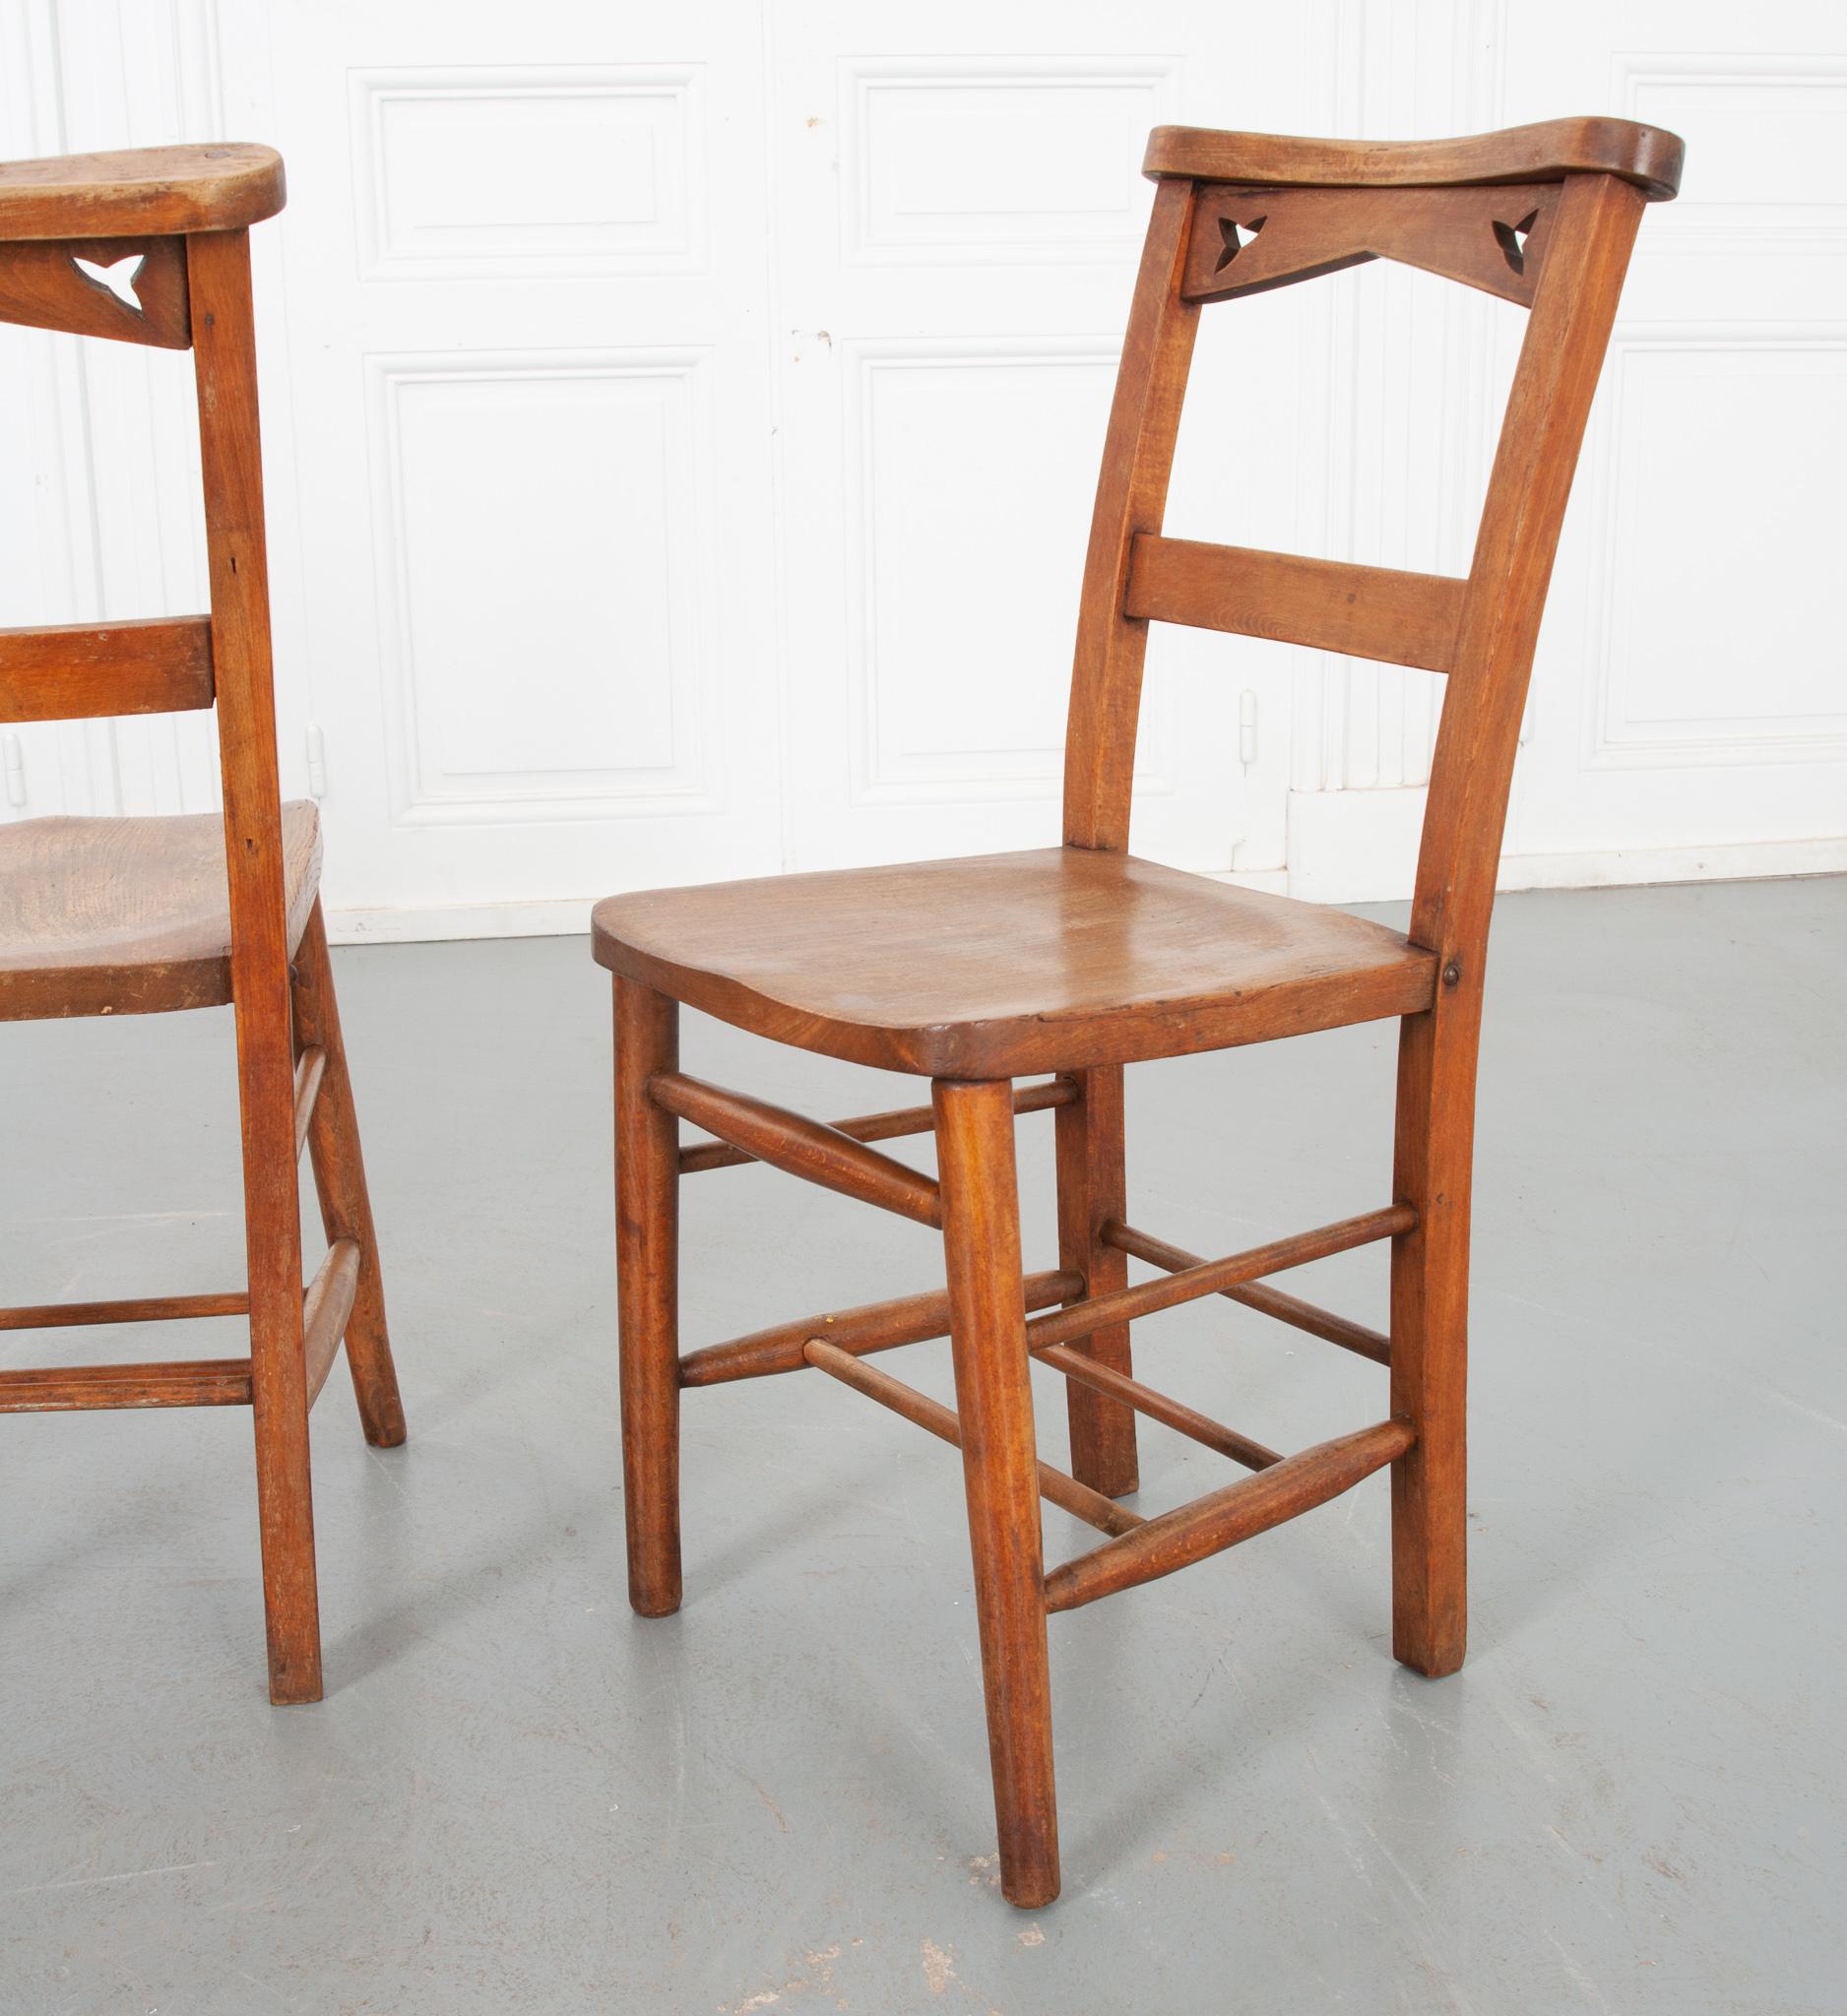 These unique chairs are sold as a set of twelve, eight of which have book holders attached to the back, as they were once used in a church setting. The top of the chairs have a slight downward slope, possibly shaped for those in the row behind to